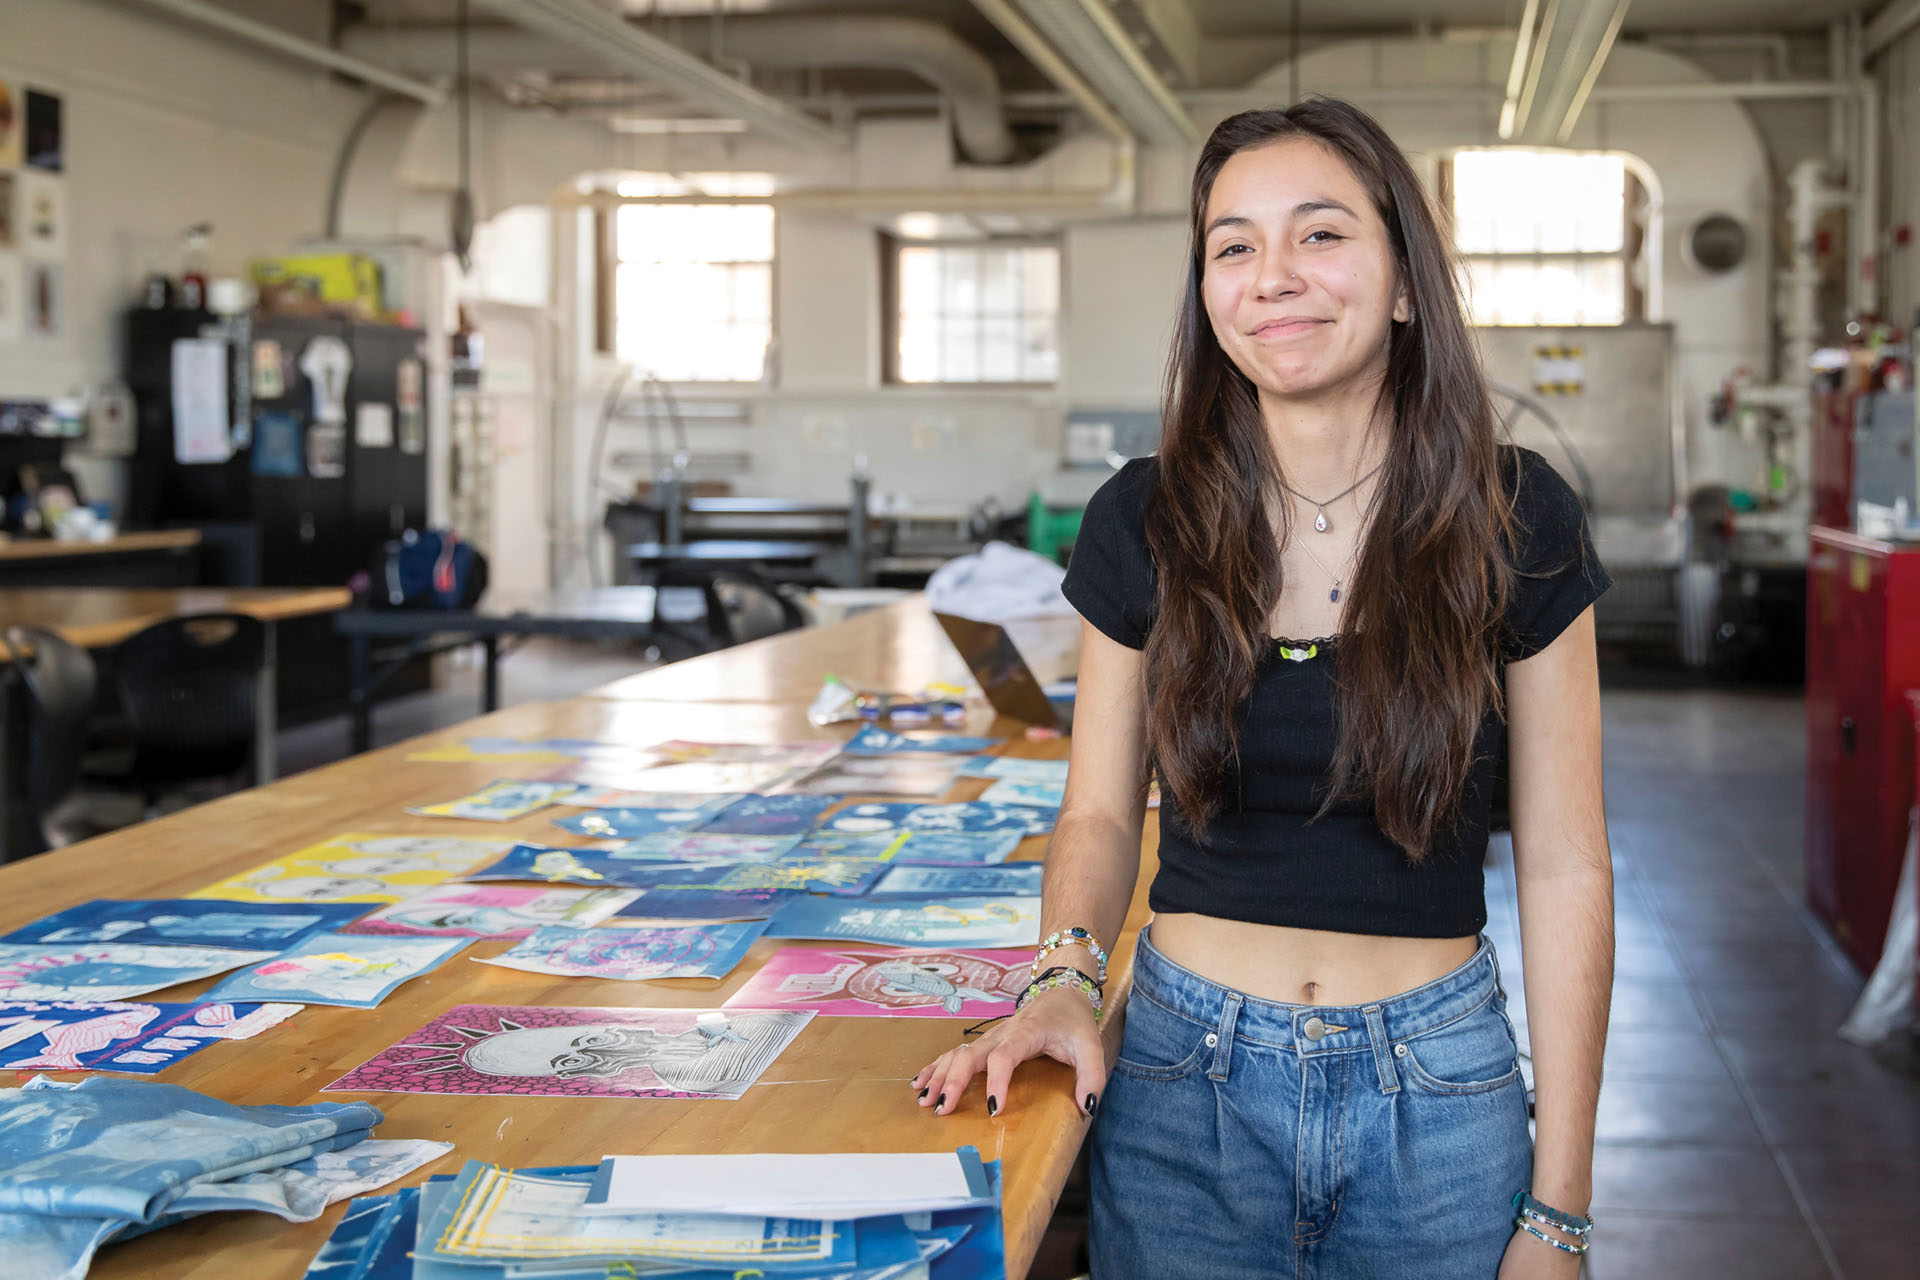 Eva Chavez stands in an art studio surrounded by posters.